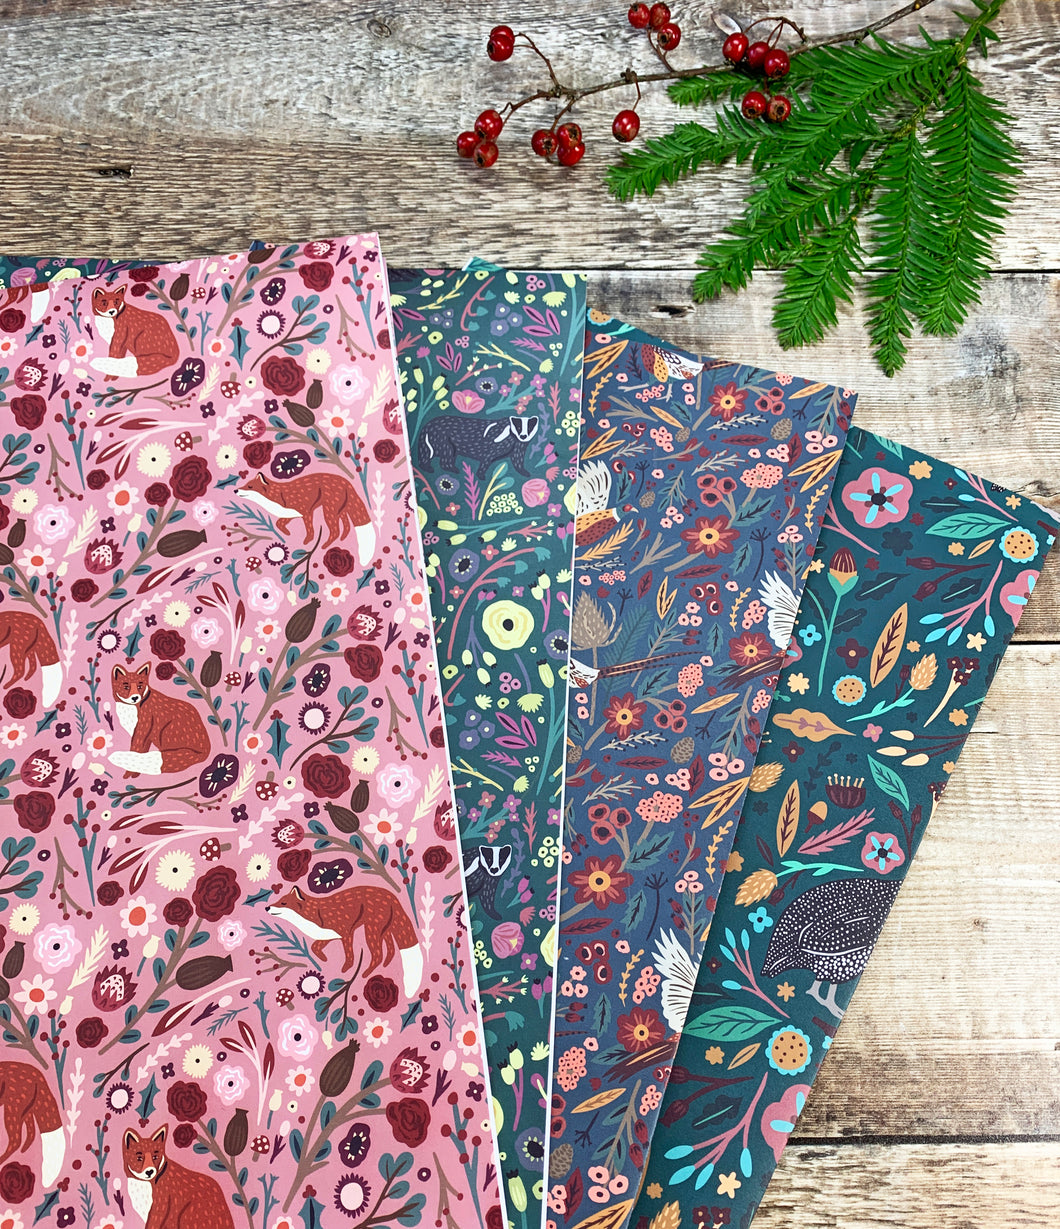 Autumn/Winter Wrapping Paper Set